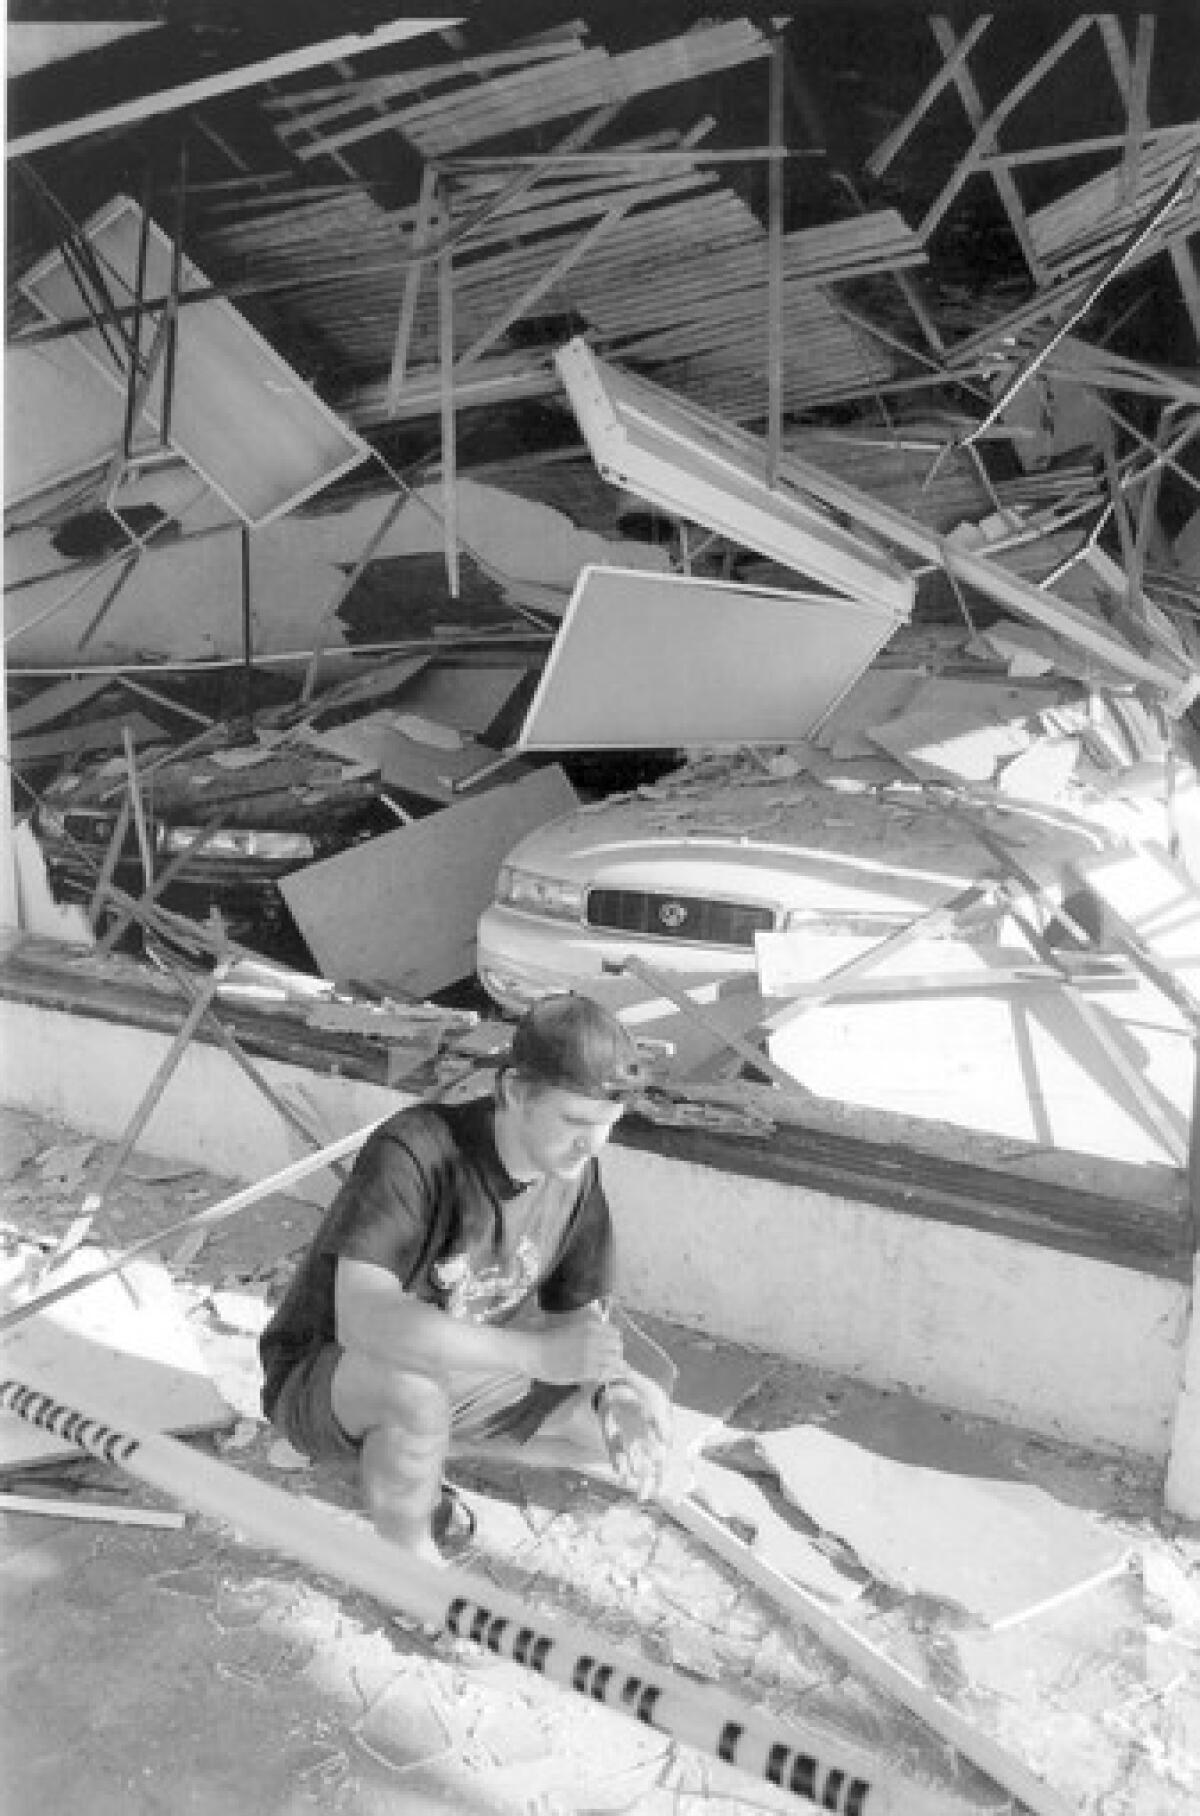 David Lane checks damage in front of a Mazda dealership in Santa Monica after the 1994 Northridge earthquake. Santa Monica adopted regulations on retrofitting vulnerable buildings, but its resolve has faded in recent years.